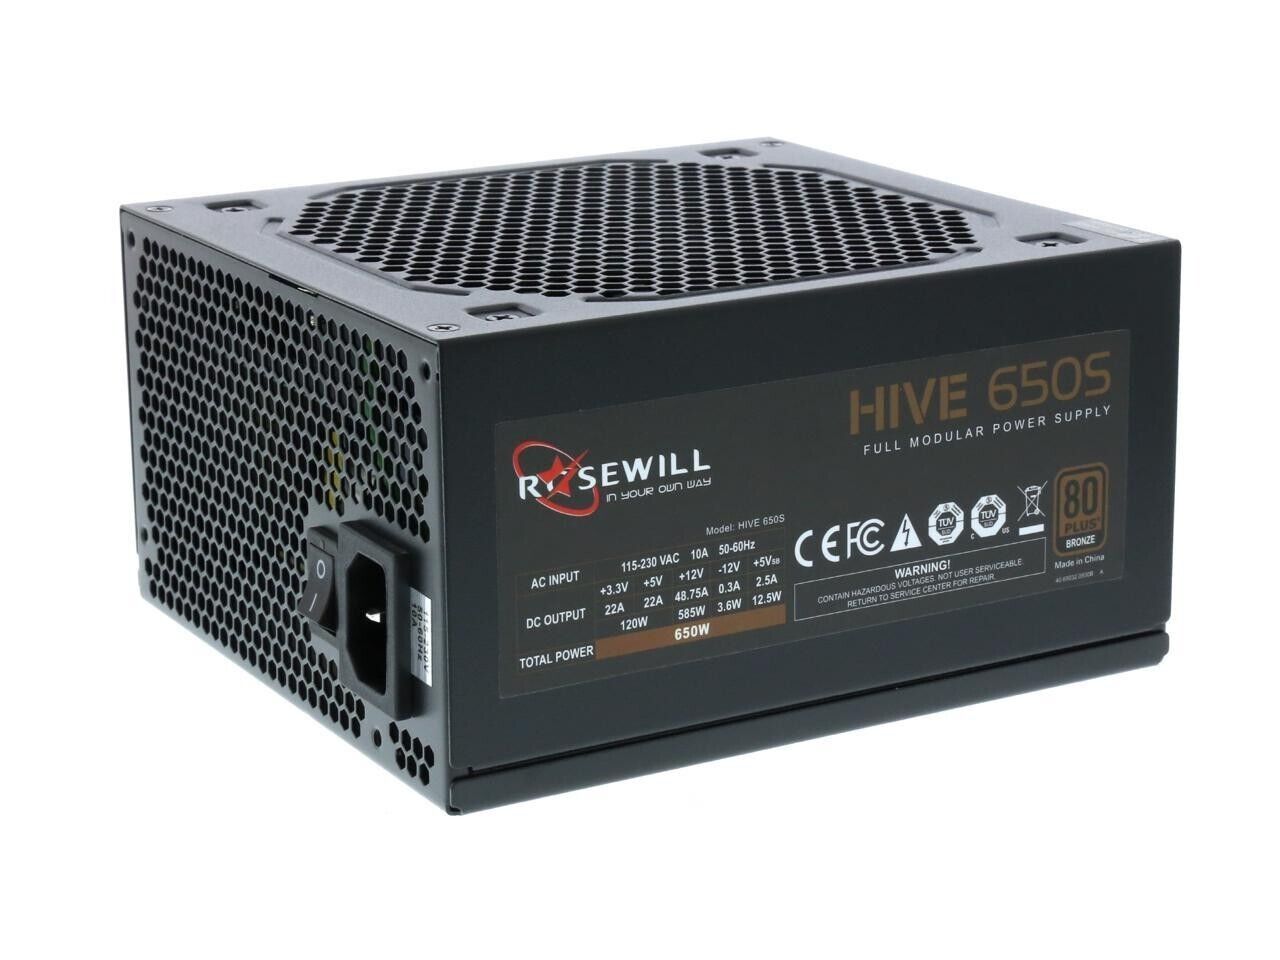 Rosewill HIVE Series, HIVE-650S, 650W Fully Modular Power Supply, 80 PLUS BRONZE